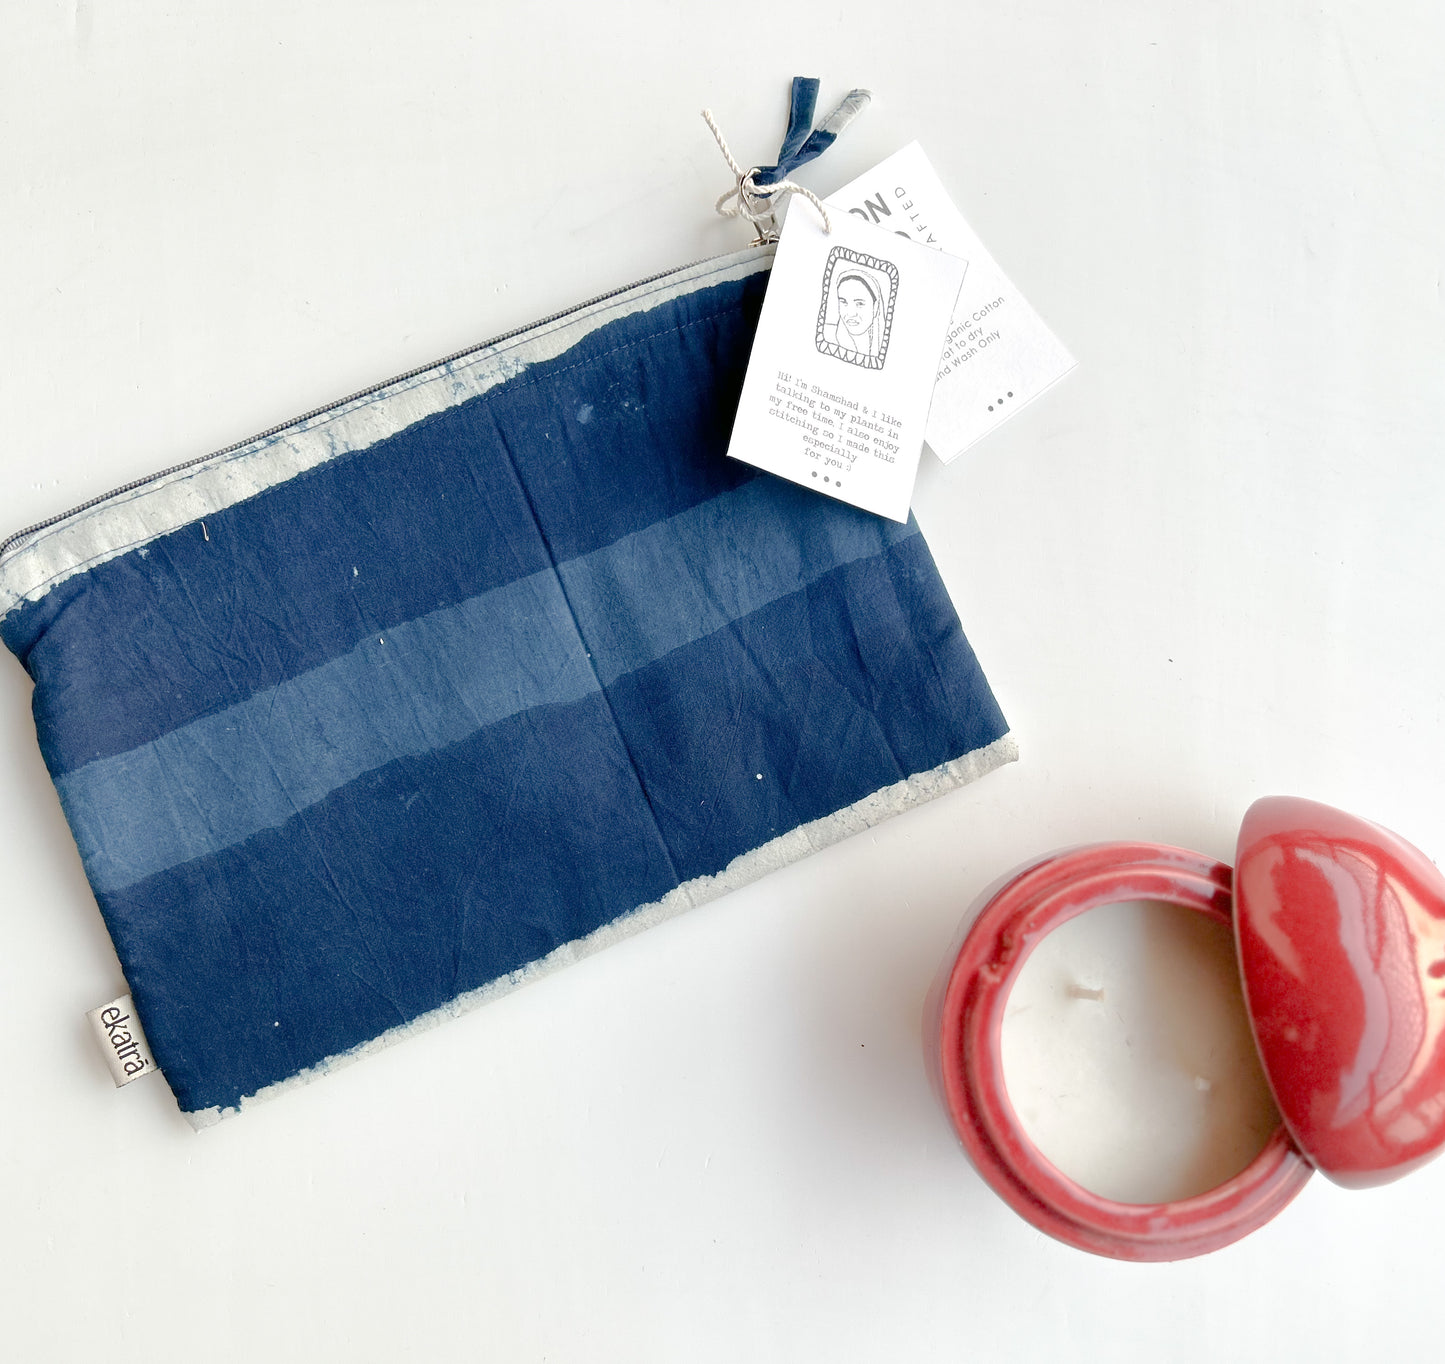 Sustainable Cotton Travel Pouch/Organizer by Ekatra